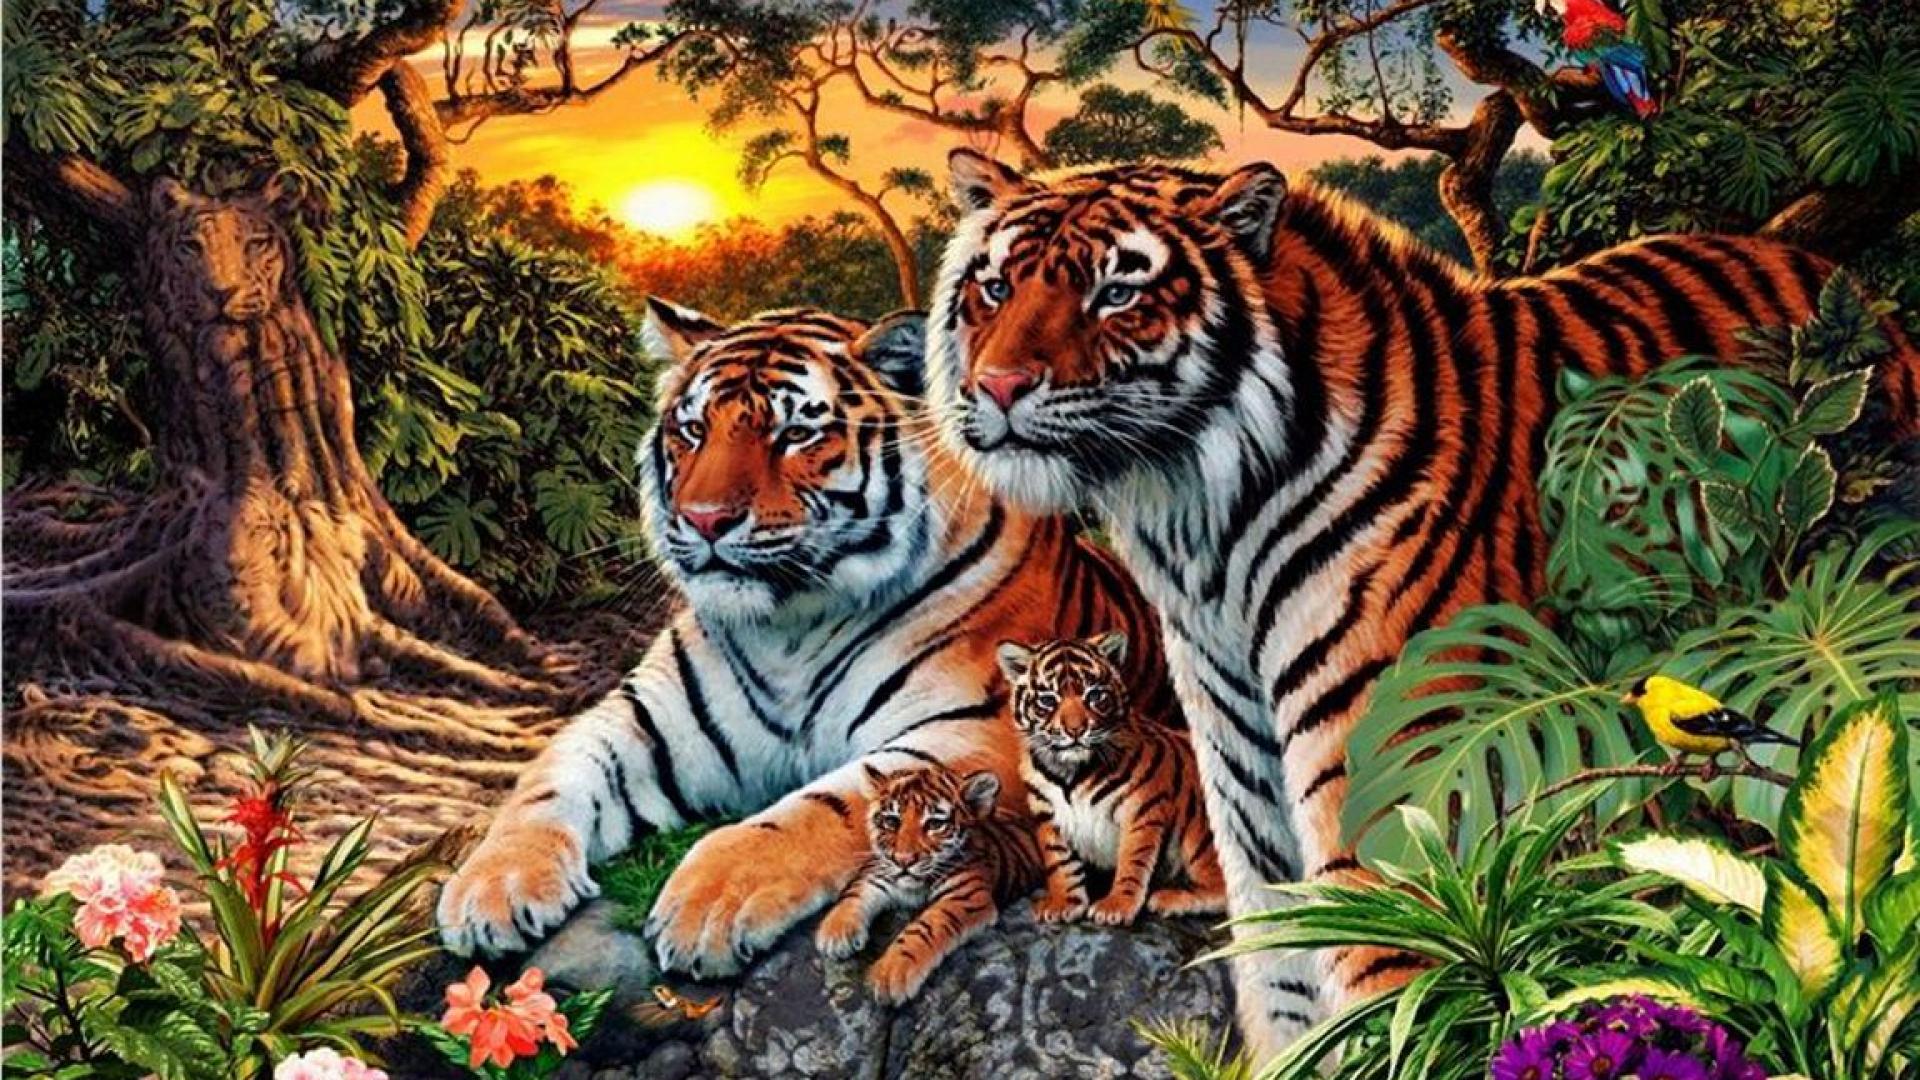 the_forest_of_tiger_trees_cats_cubs_jungle_1920x1080_hd-wallpaper-1765036